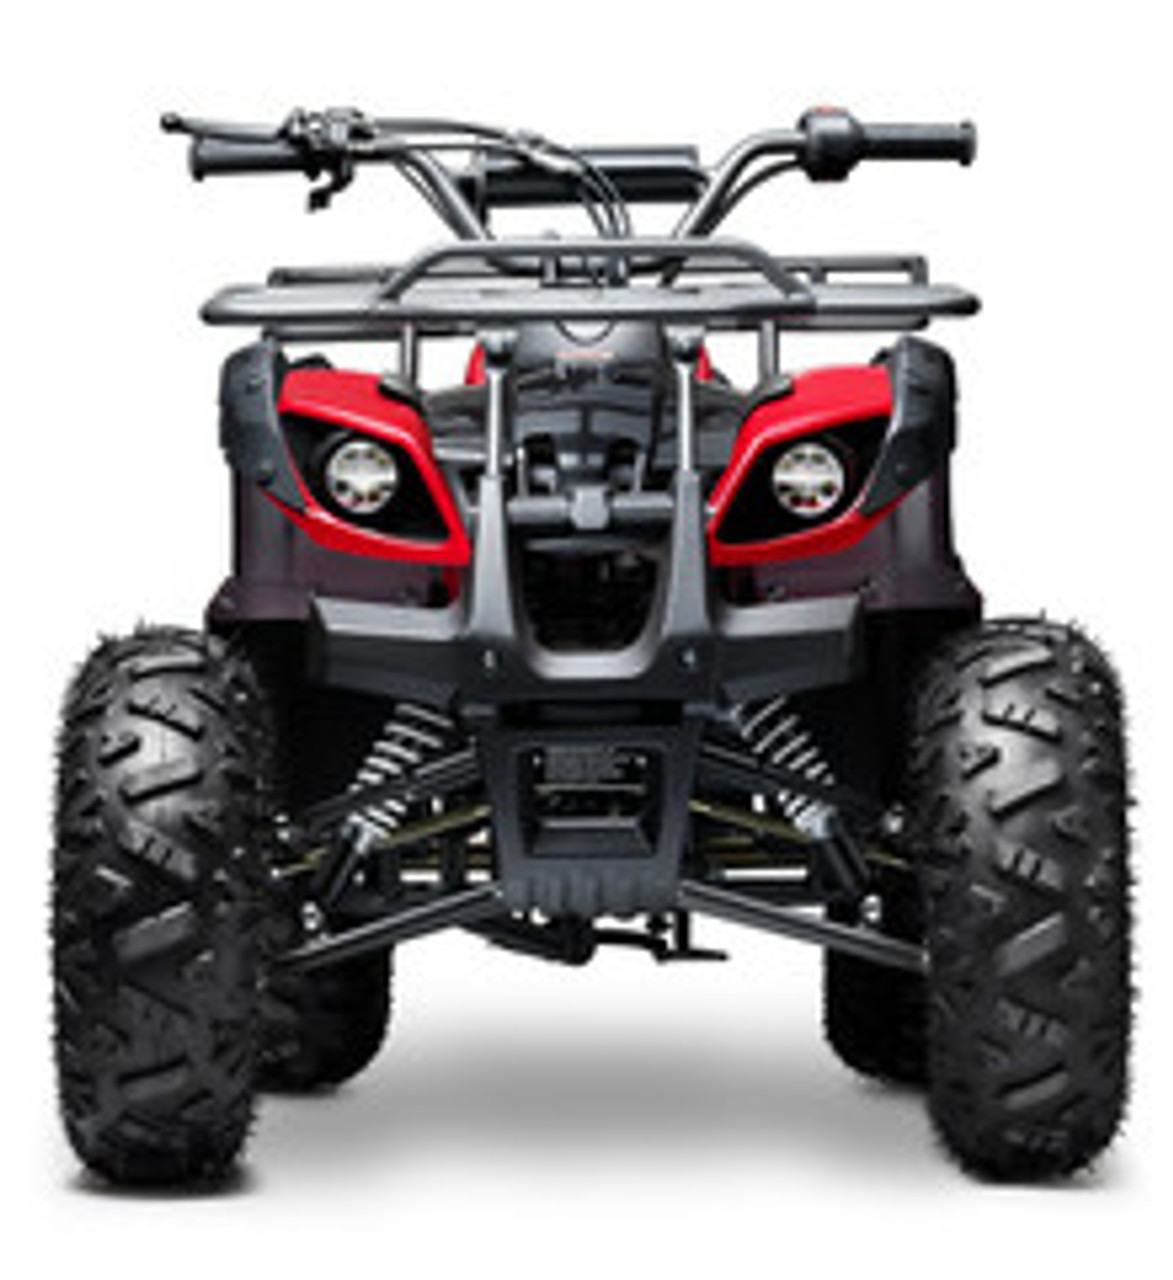 Made in Vietnam Goldenwing New Bull 125 ATV, 125cc Air Cooled, 4-Stroke, 1-Cylinder, Automatic